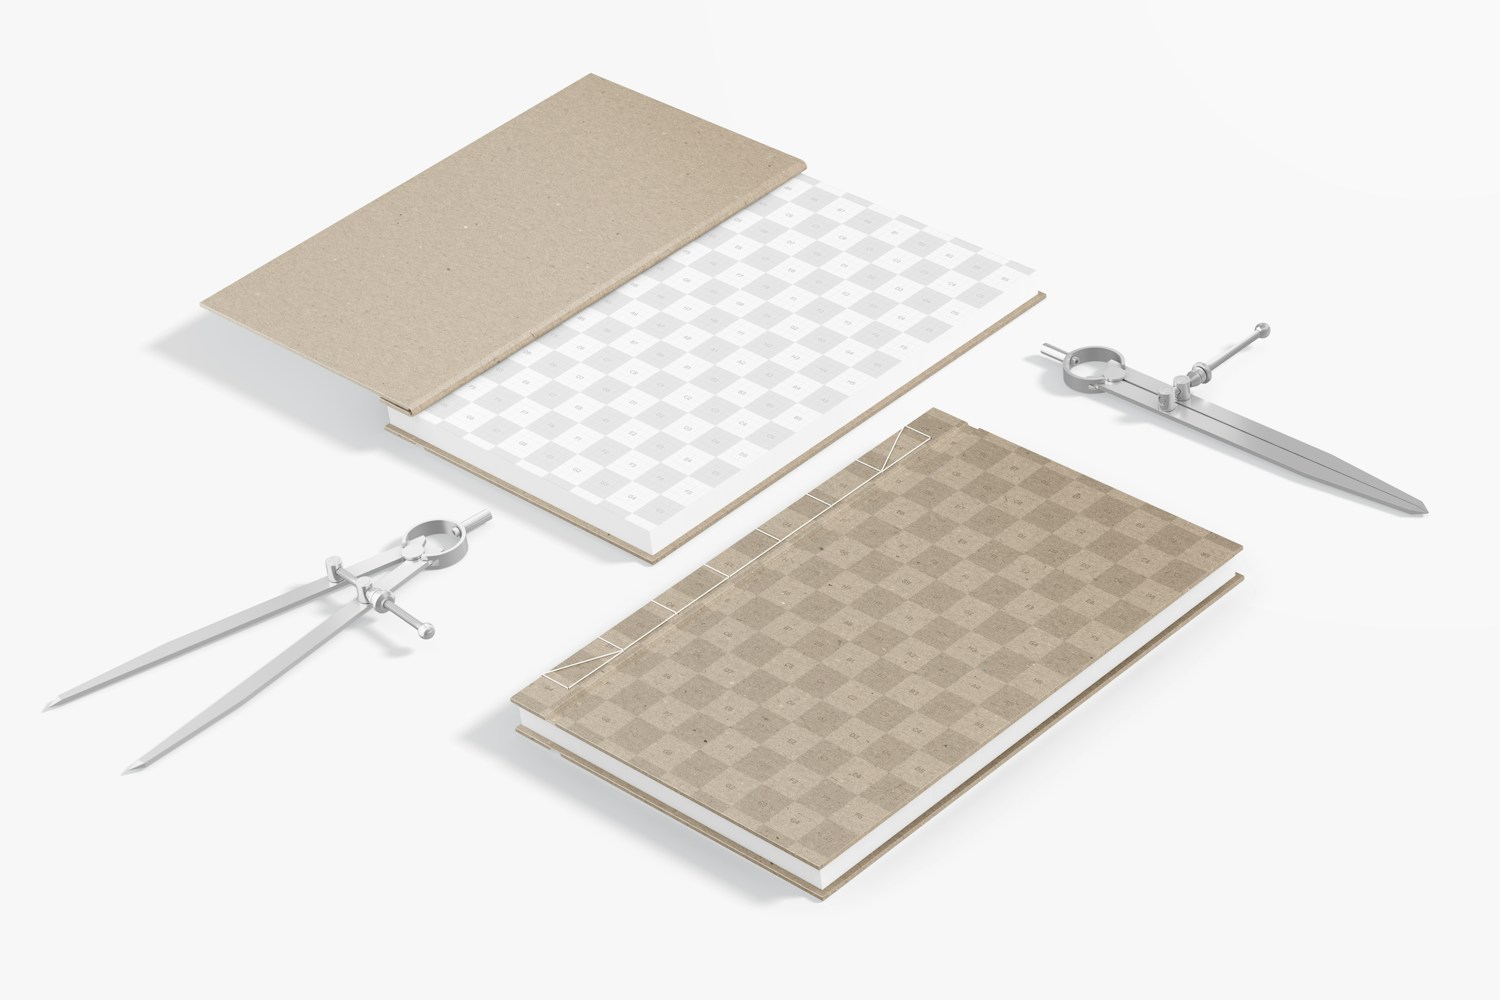 Architecture Notebooks Mockup, Opened and Closed